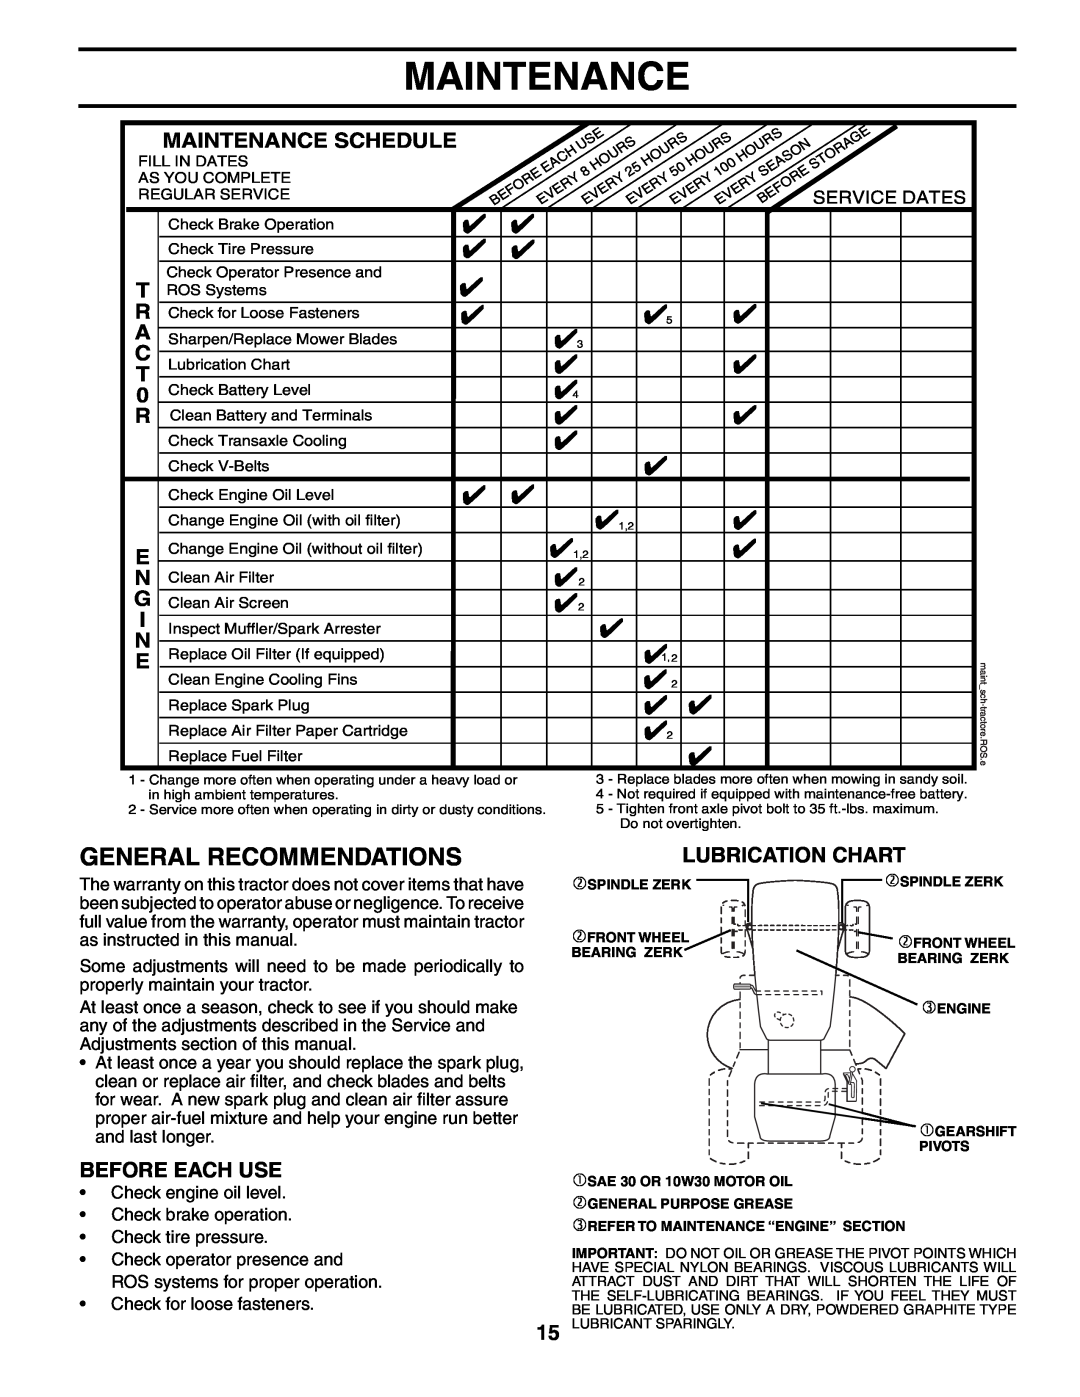 Poulan PK1942LT manual General Recommendations, Before Each Use, Lubrication Chart, Maintenance Schedule 